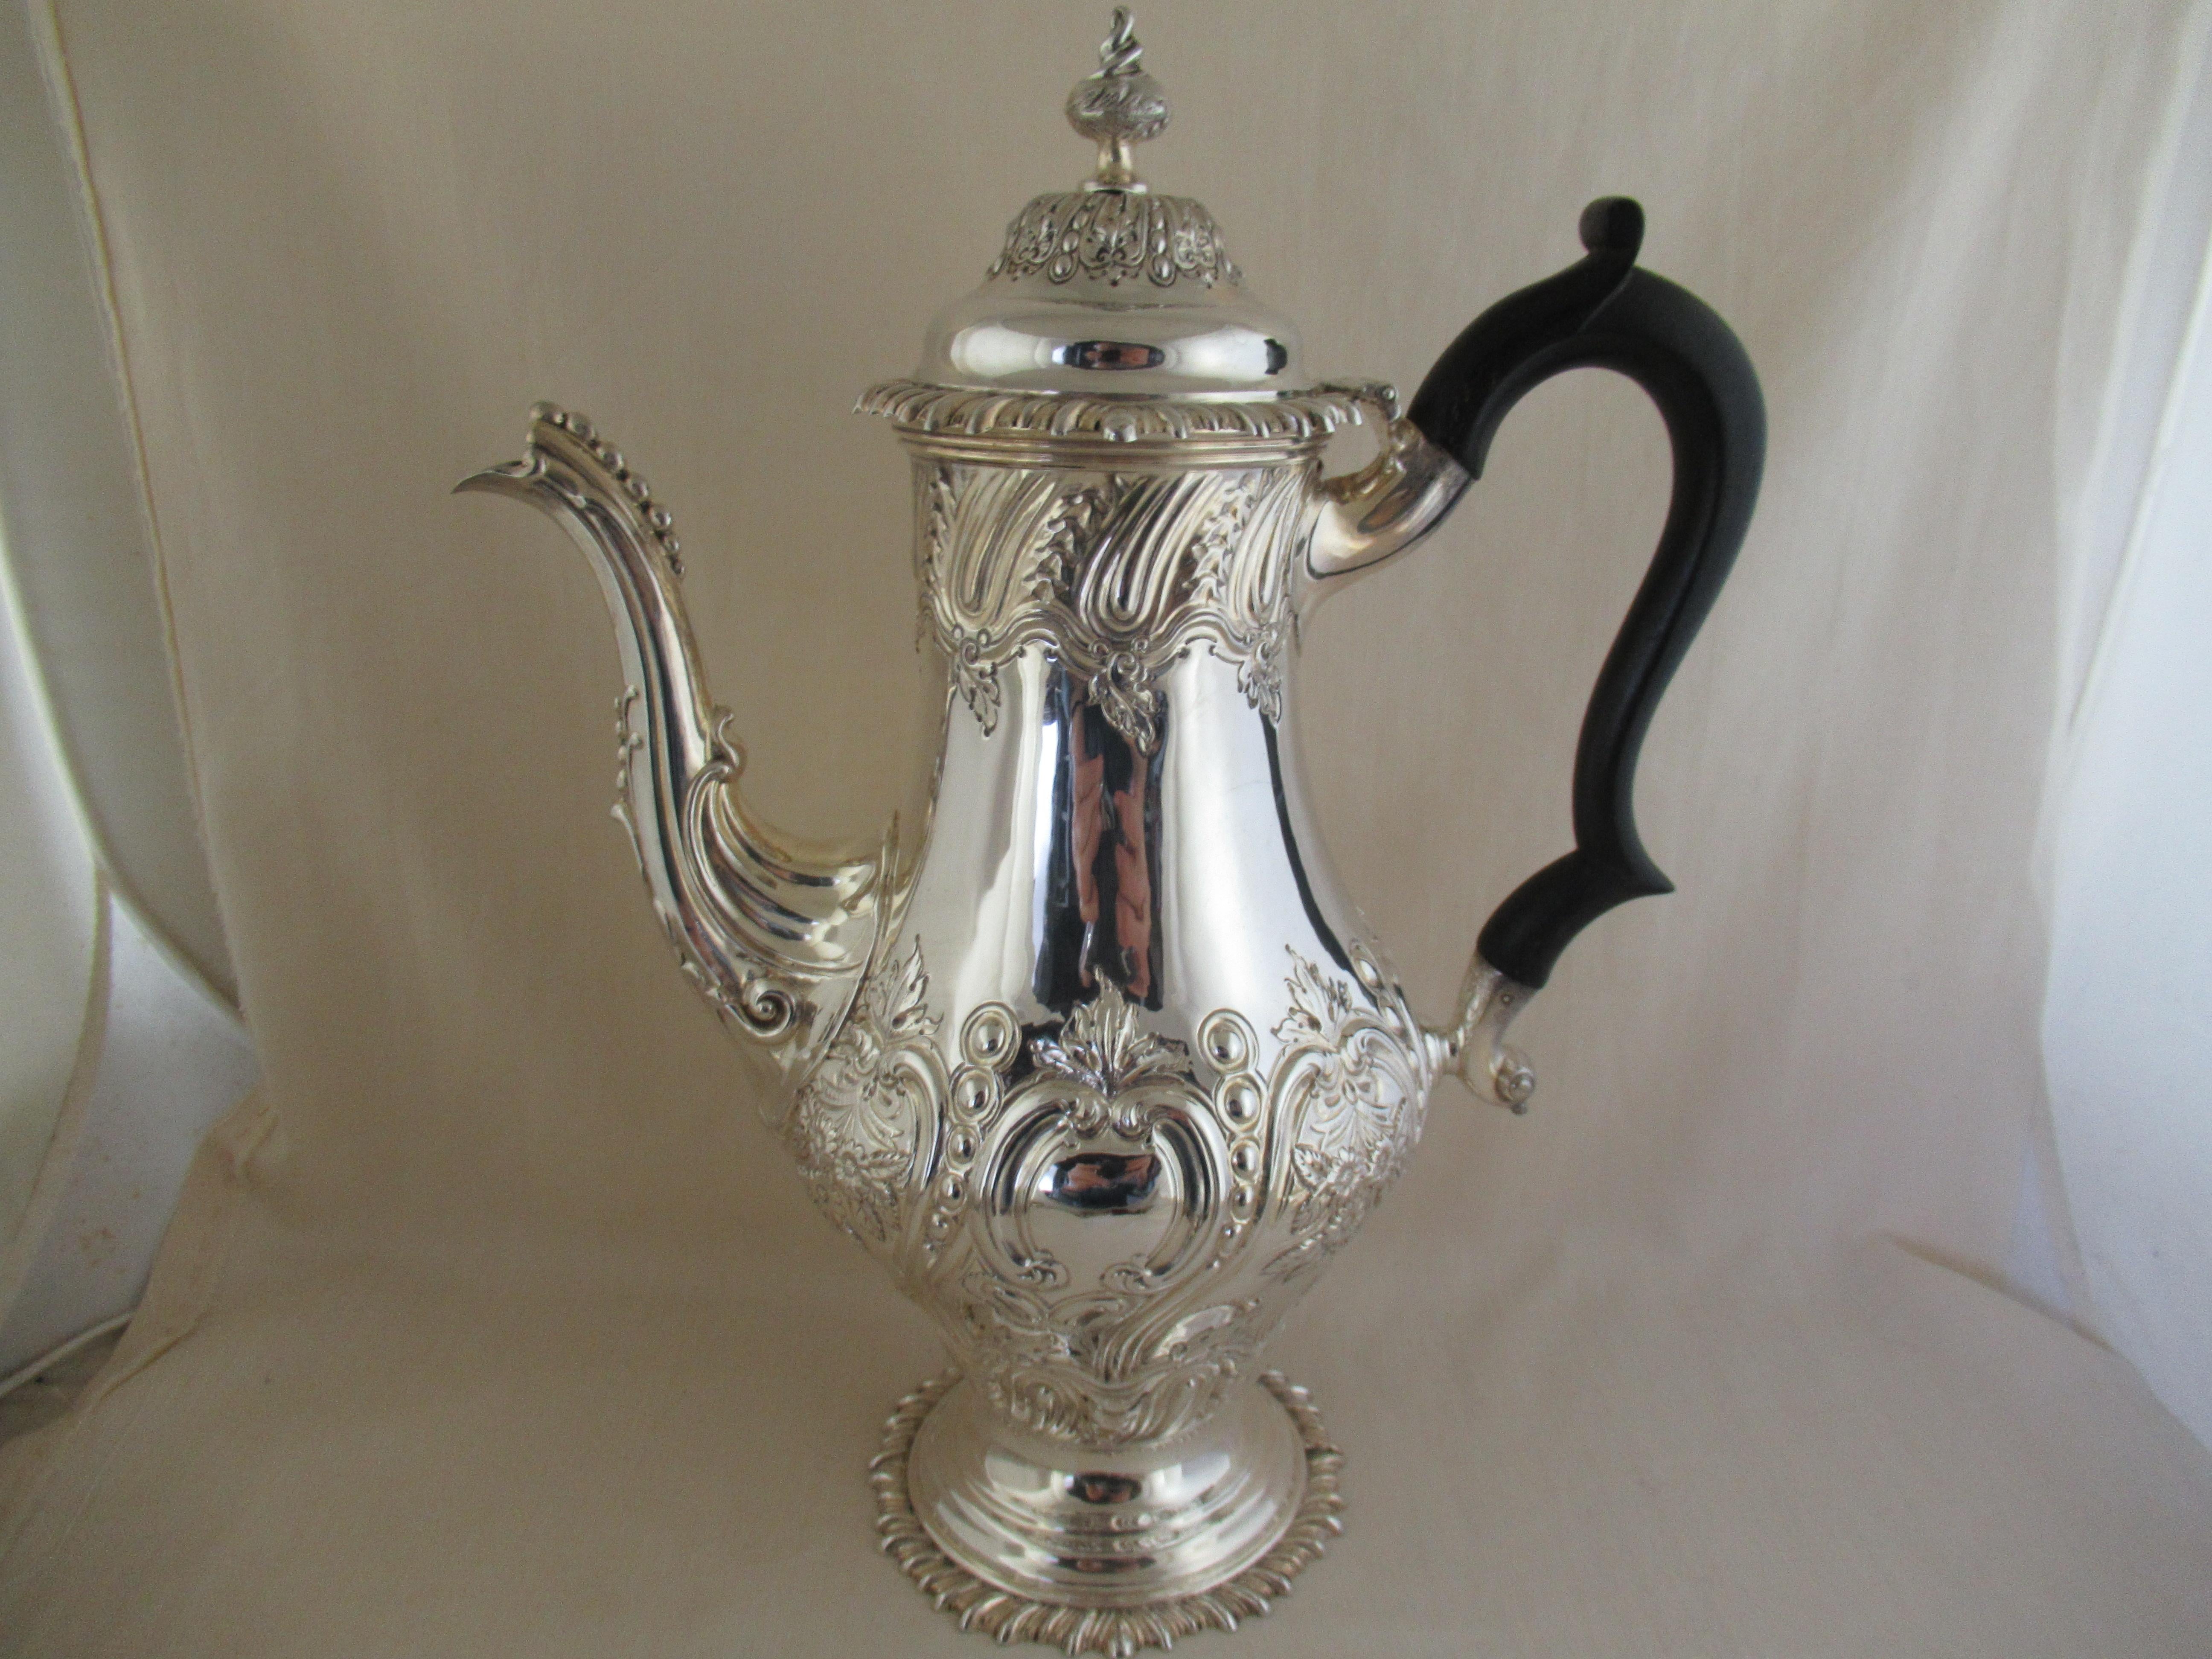 Sterling silver, large sized, baluster shaped Coffee Pot
Made in London in 1889, by Joseph & Horace Savory, trading as the Goldsmiths Alliance,
 Their showroom in Regent Street, London.
An excellent set of identifying hallmarks, to the right at